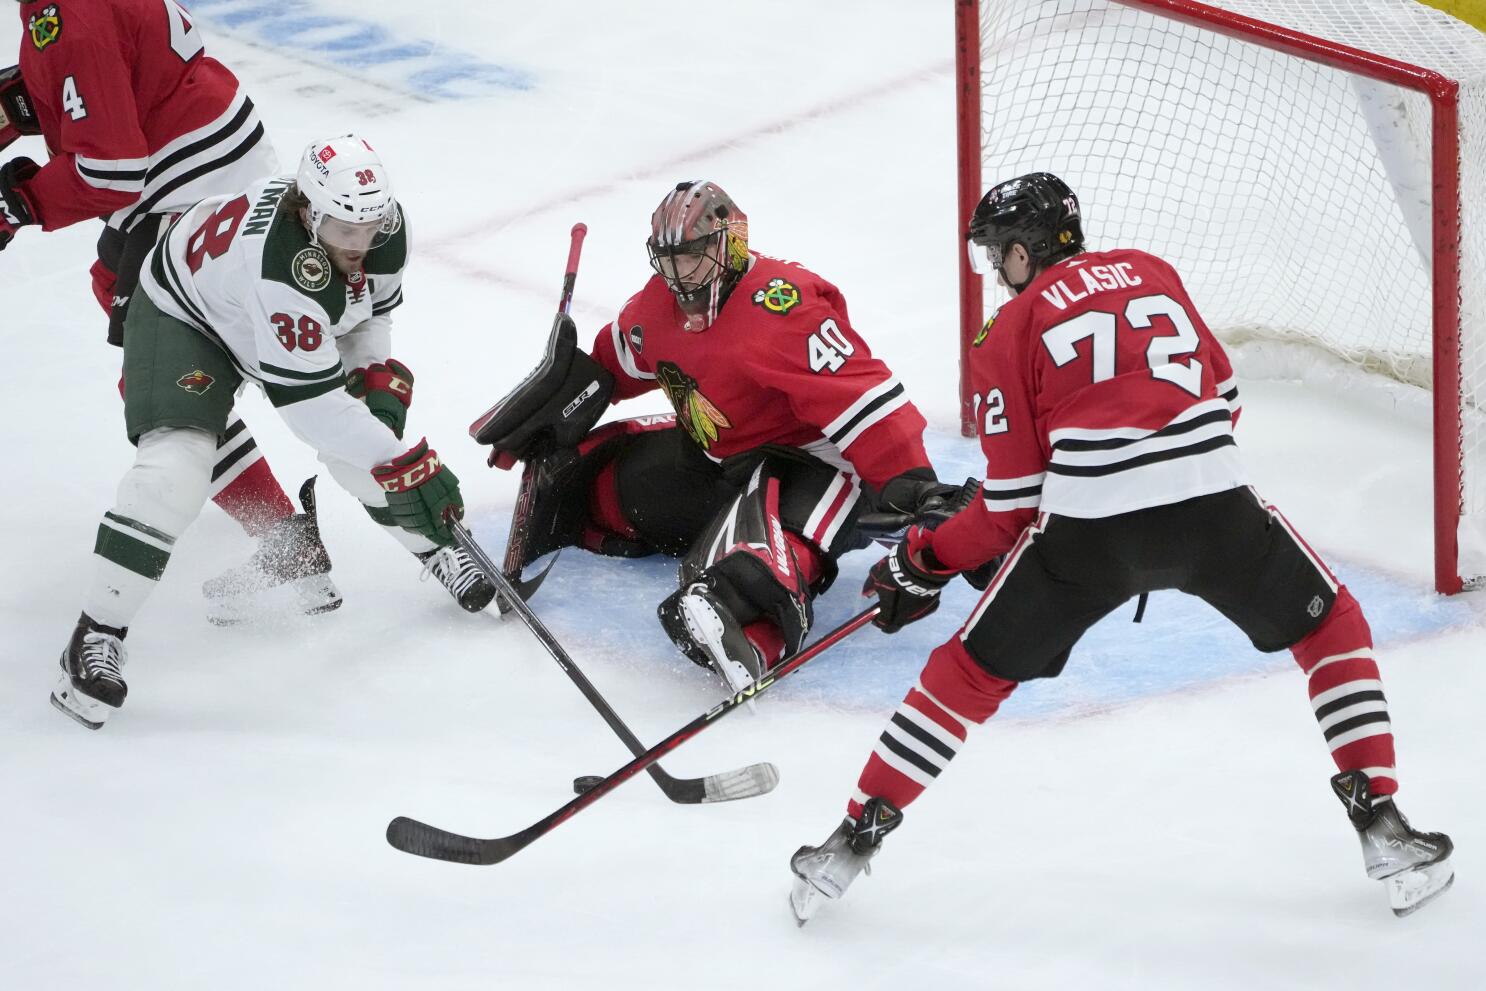 Wild's Ryan Hartman hopes contract extension 'gets done soon' – Twin Cities